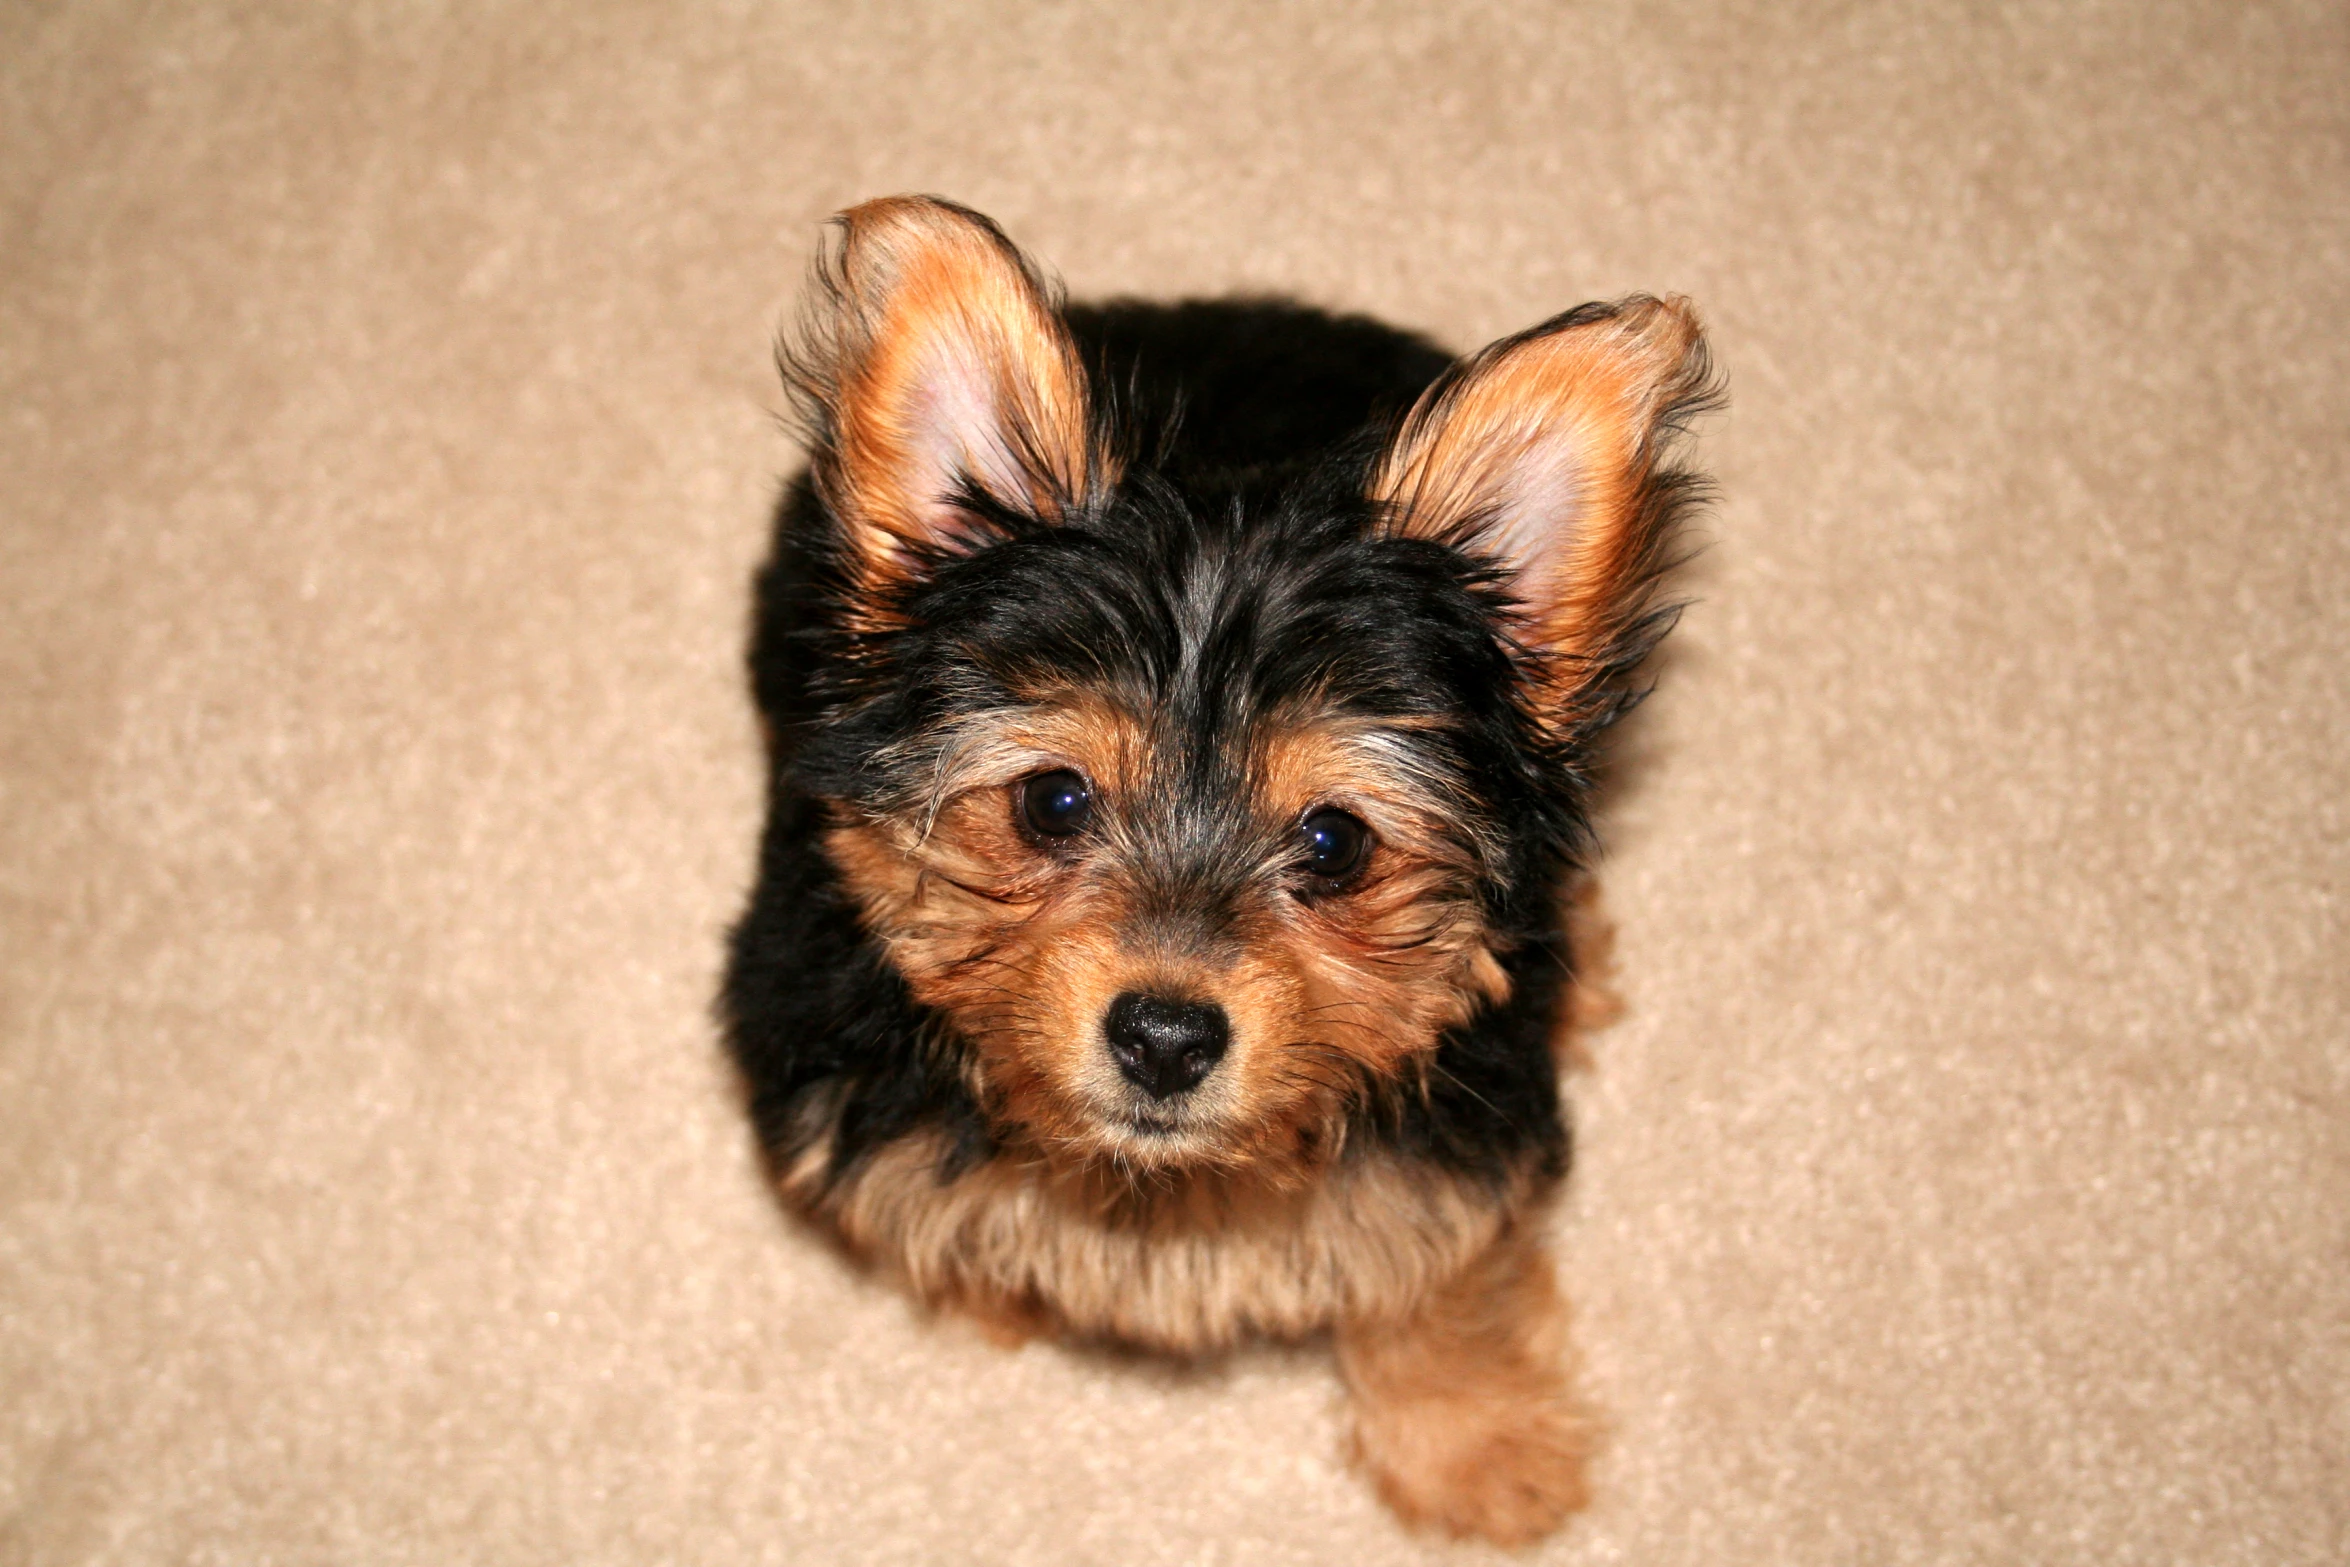 a small dog standing on a carpet looking up